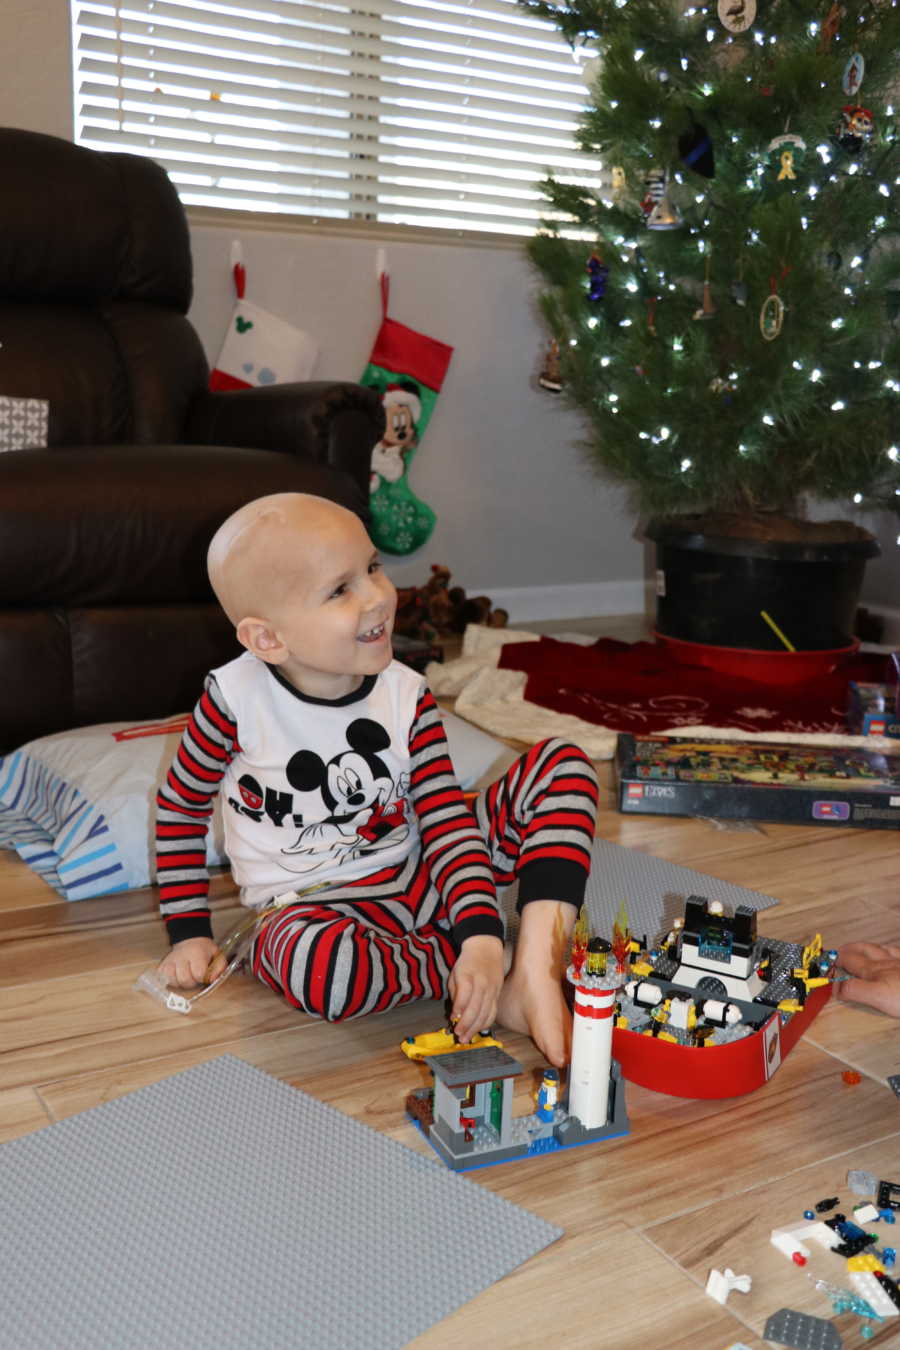 Little boy with brain cancer smiling on floor playing with legos on Christmas morning